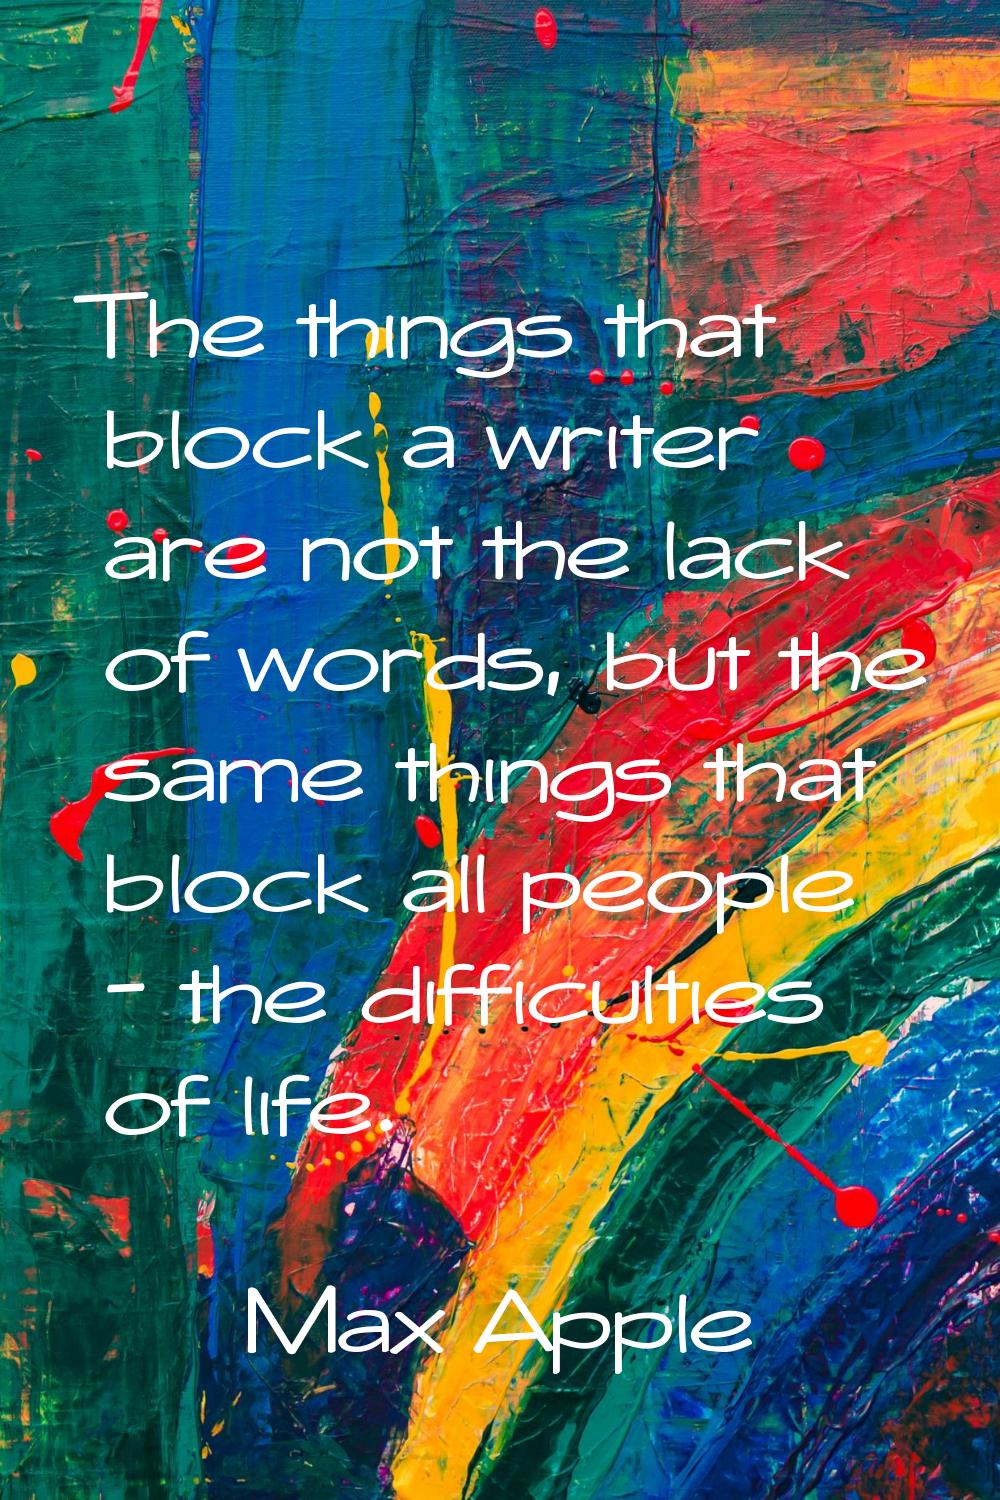 The things that block a writer are not the lack of words, but the same things that block all people